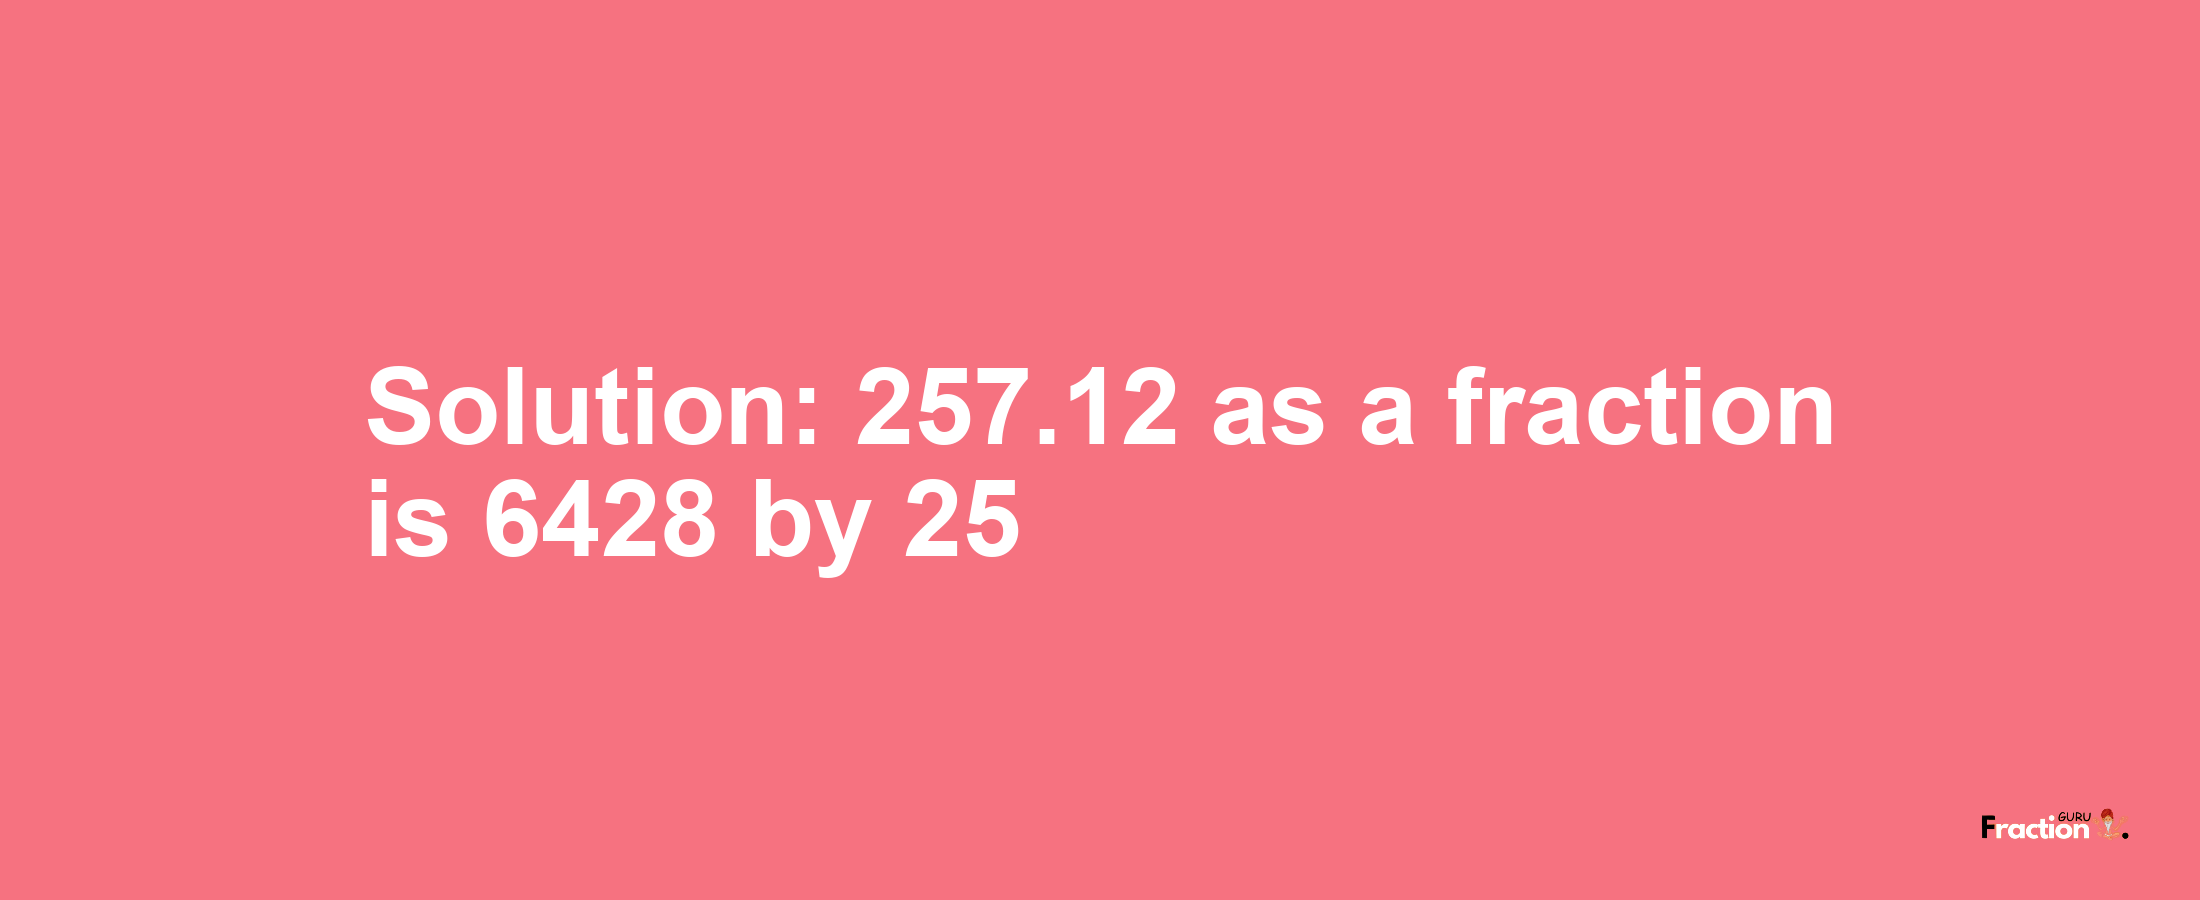 Solution:257.12 as a fraction is 6428/25